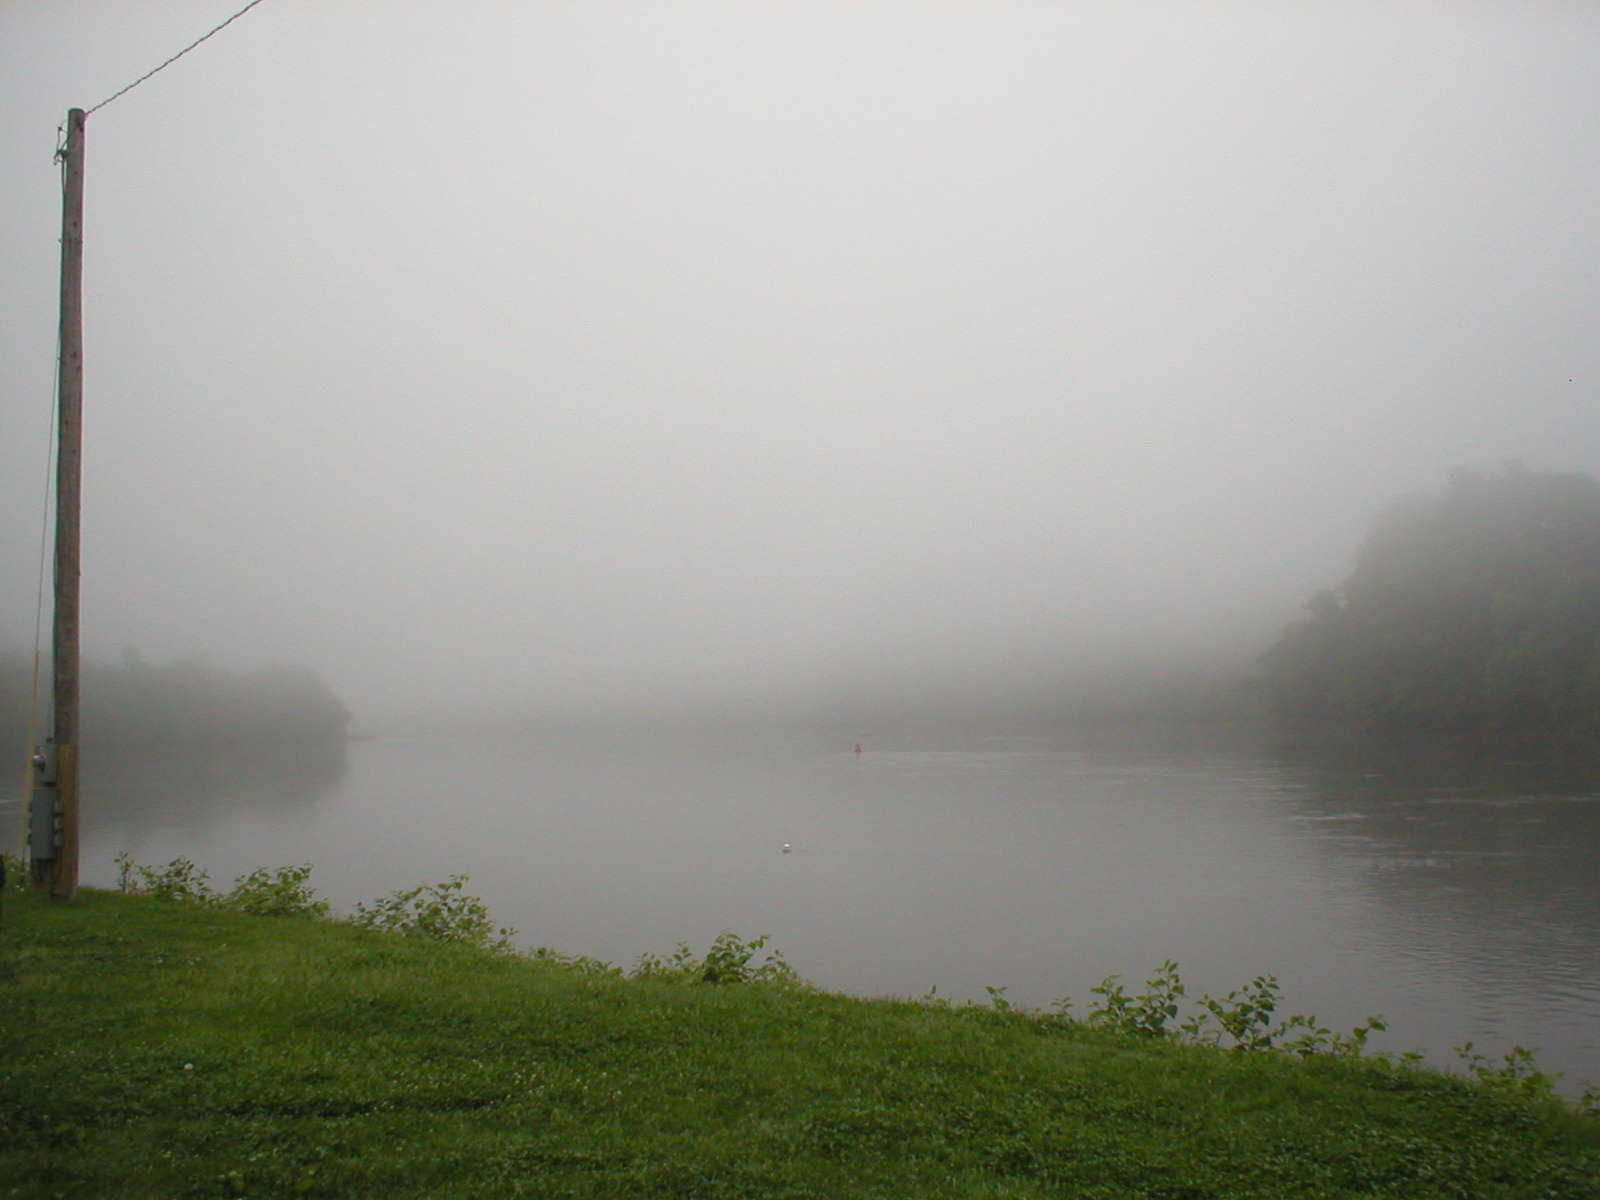 a misty scene in the countryside with a lake and trees